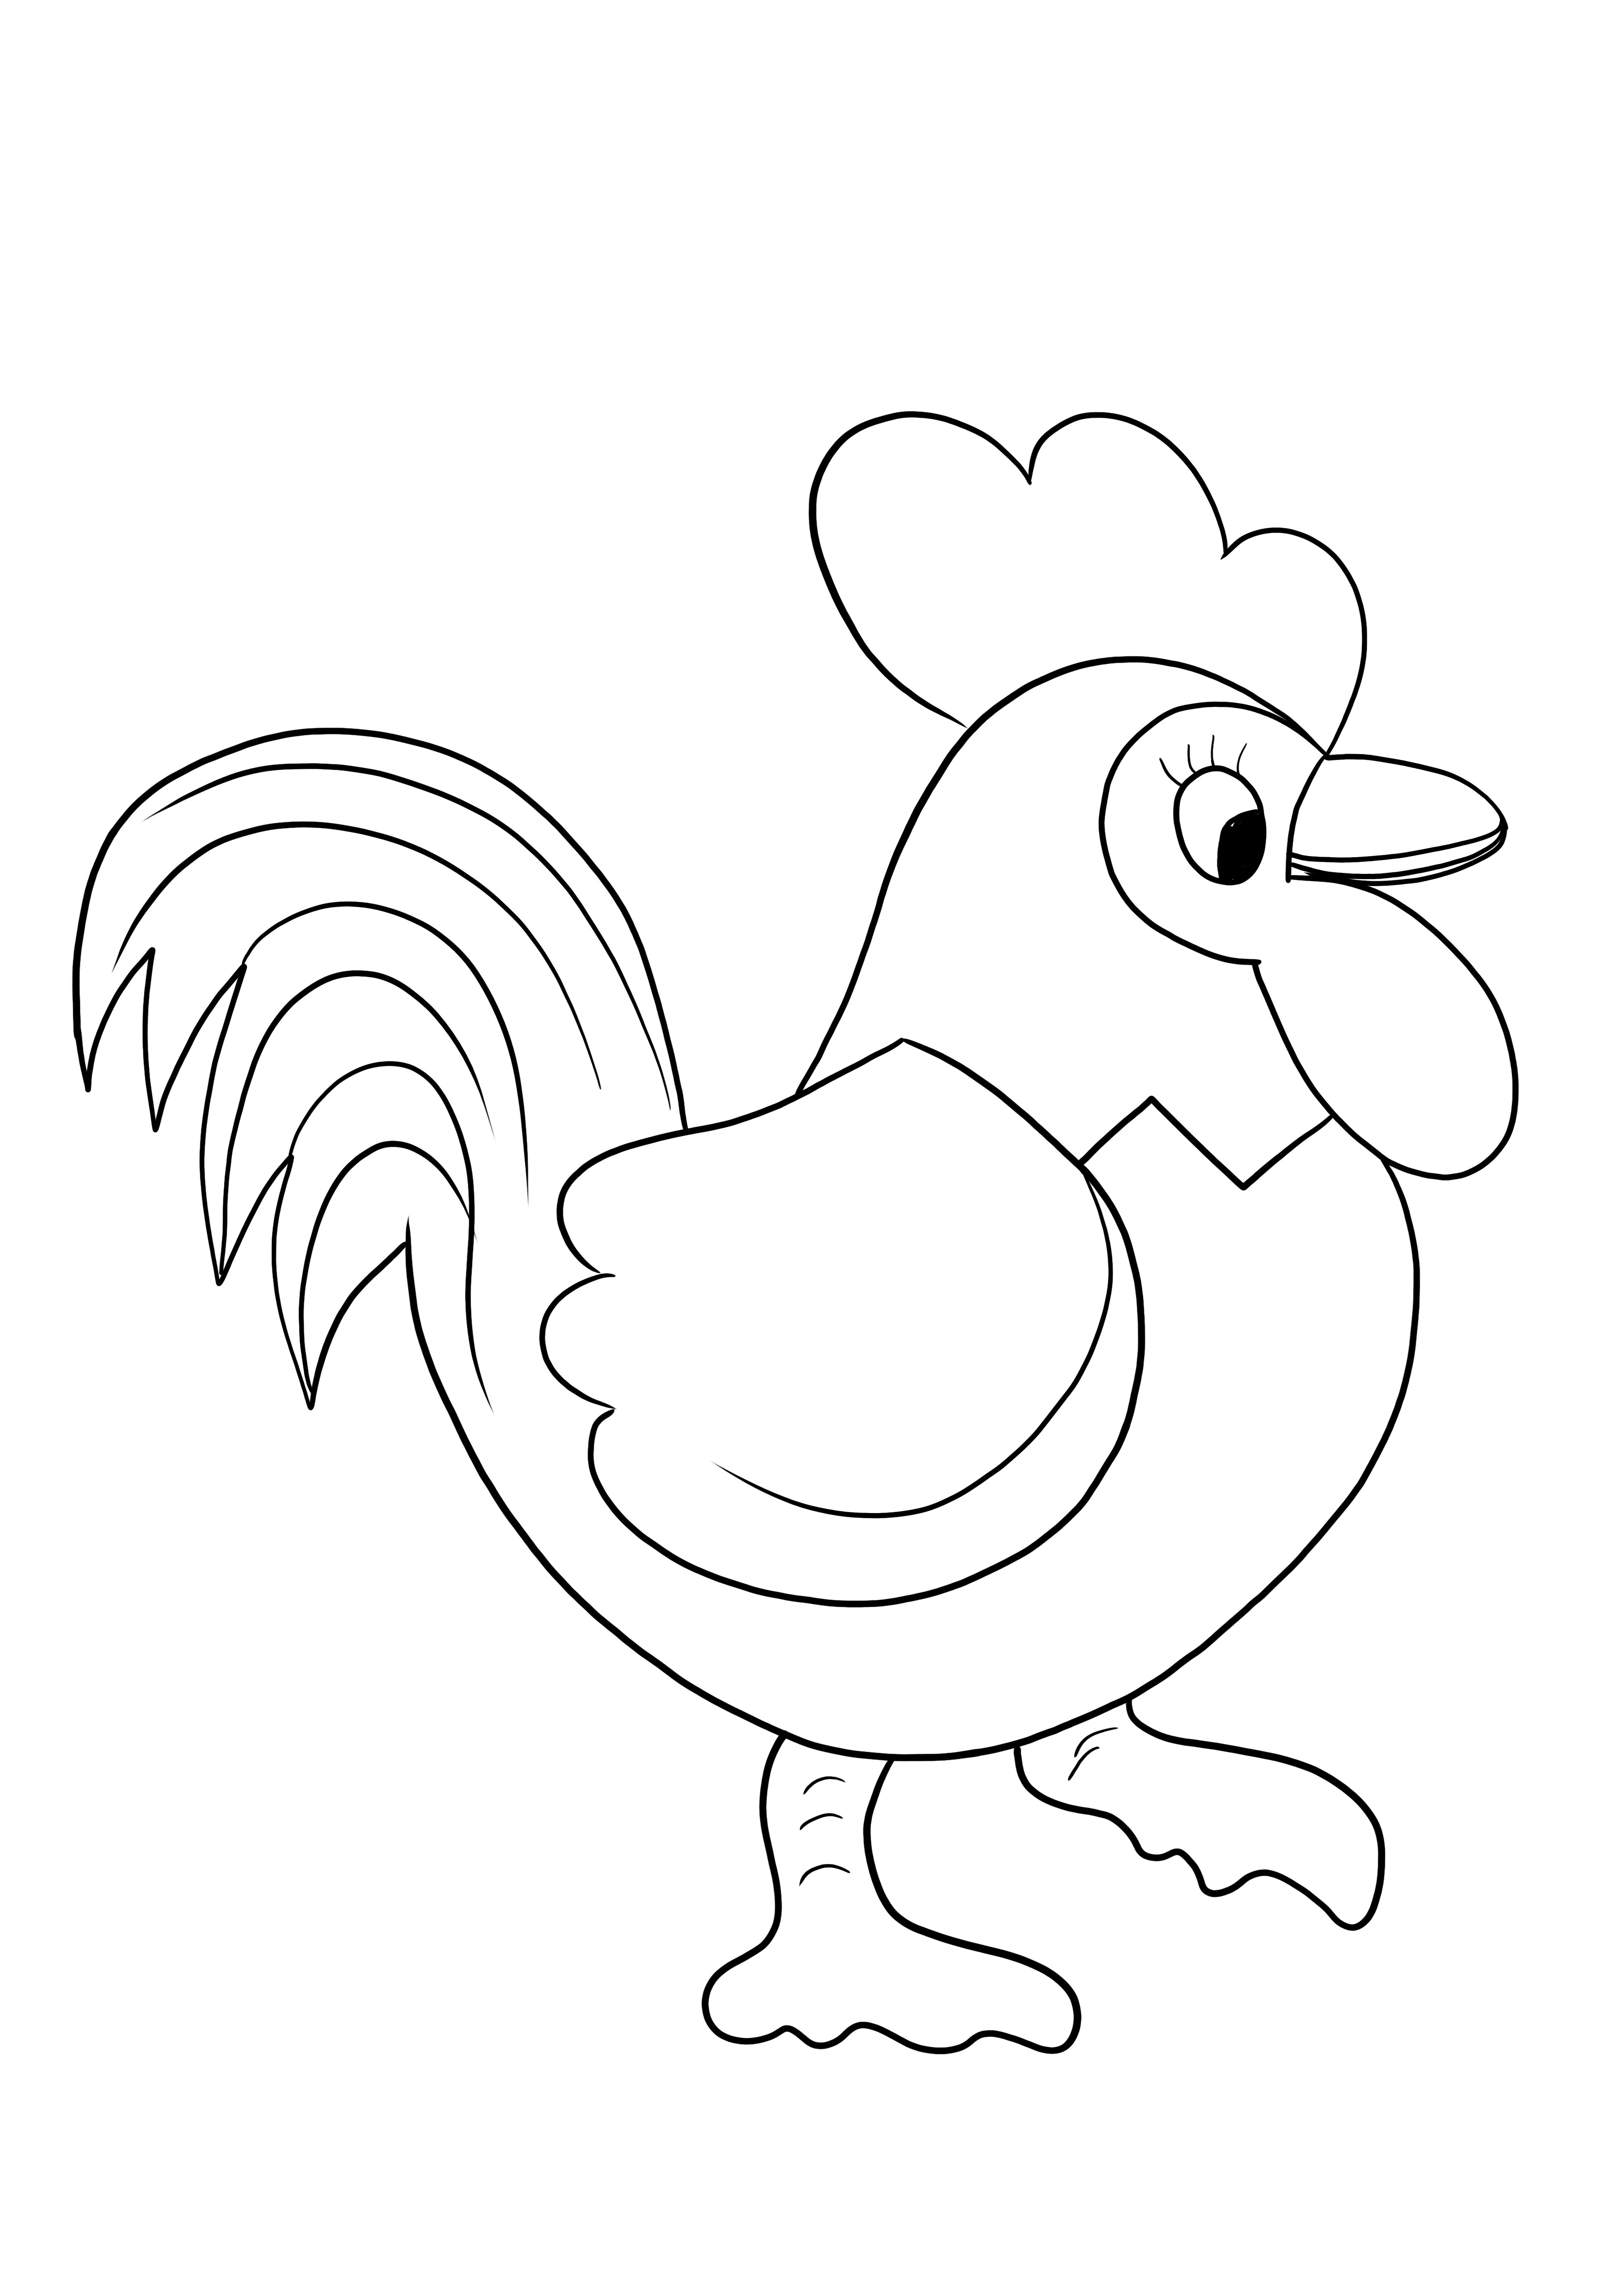 Rooster coloring and free printing